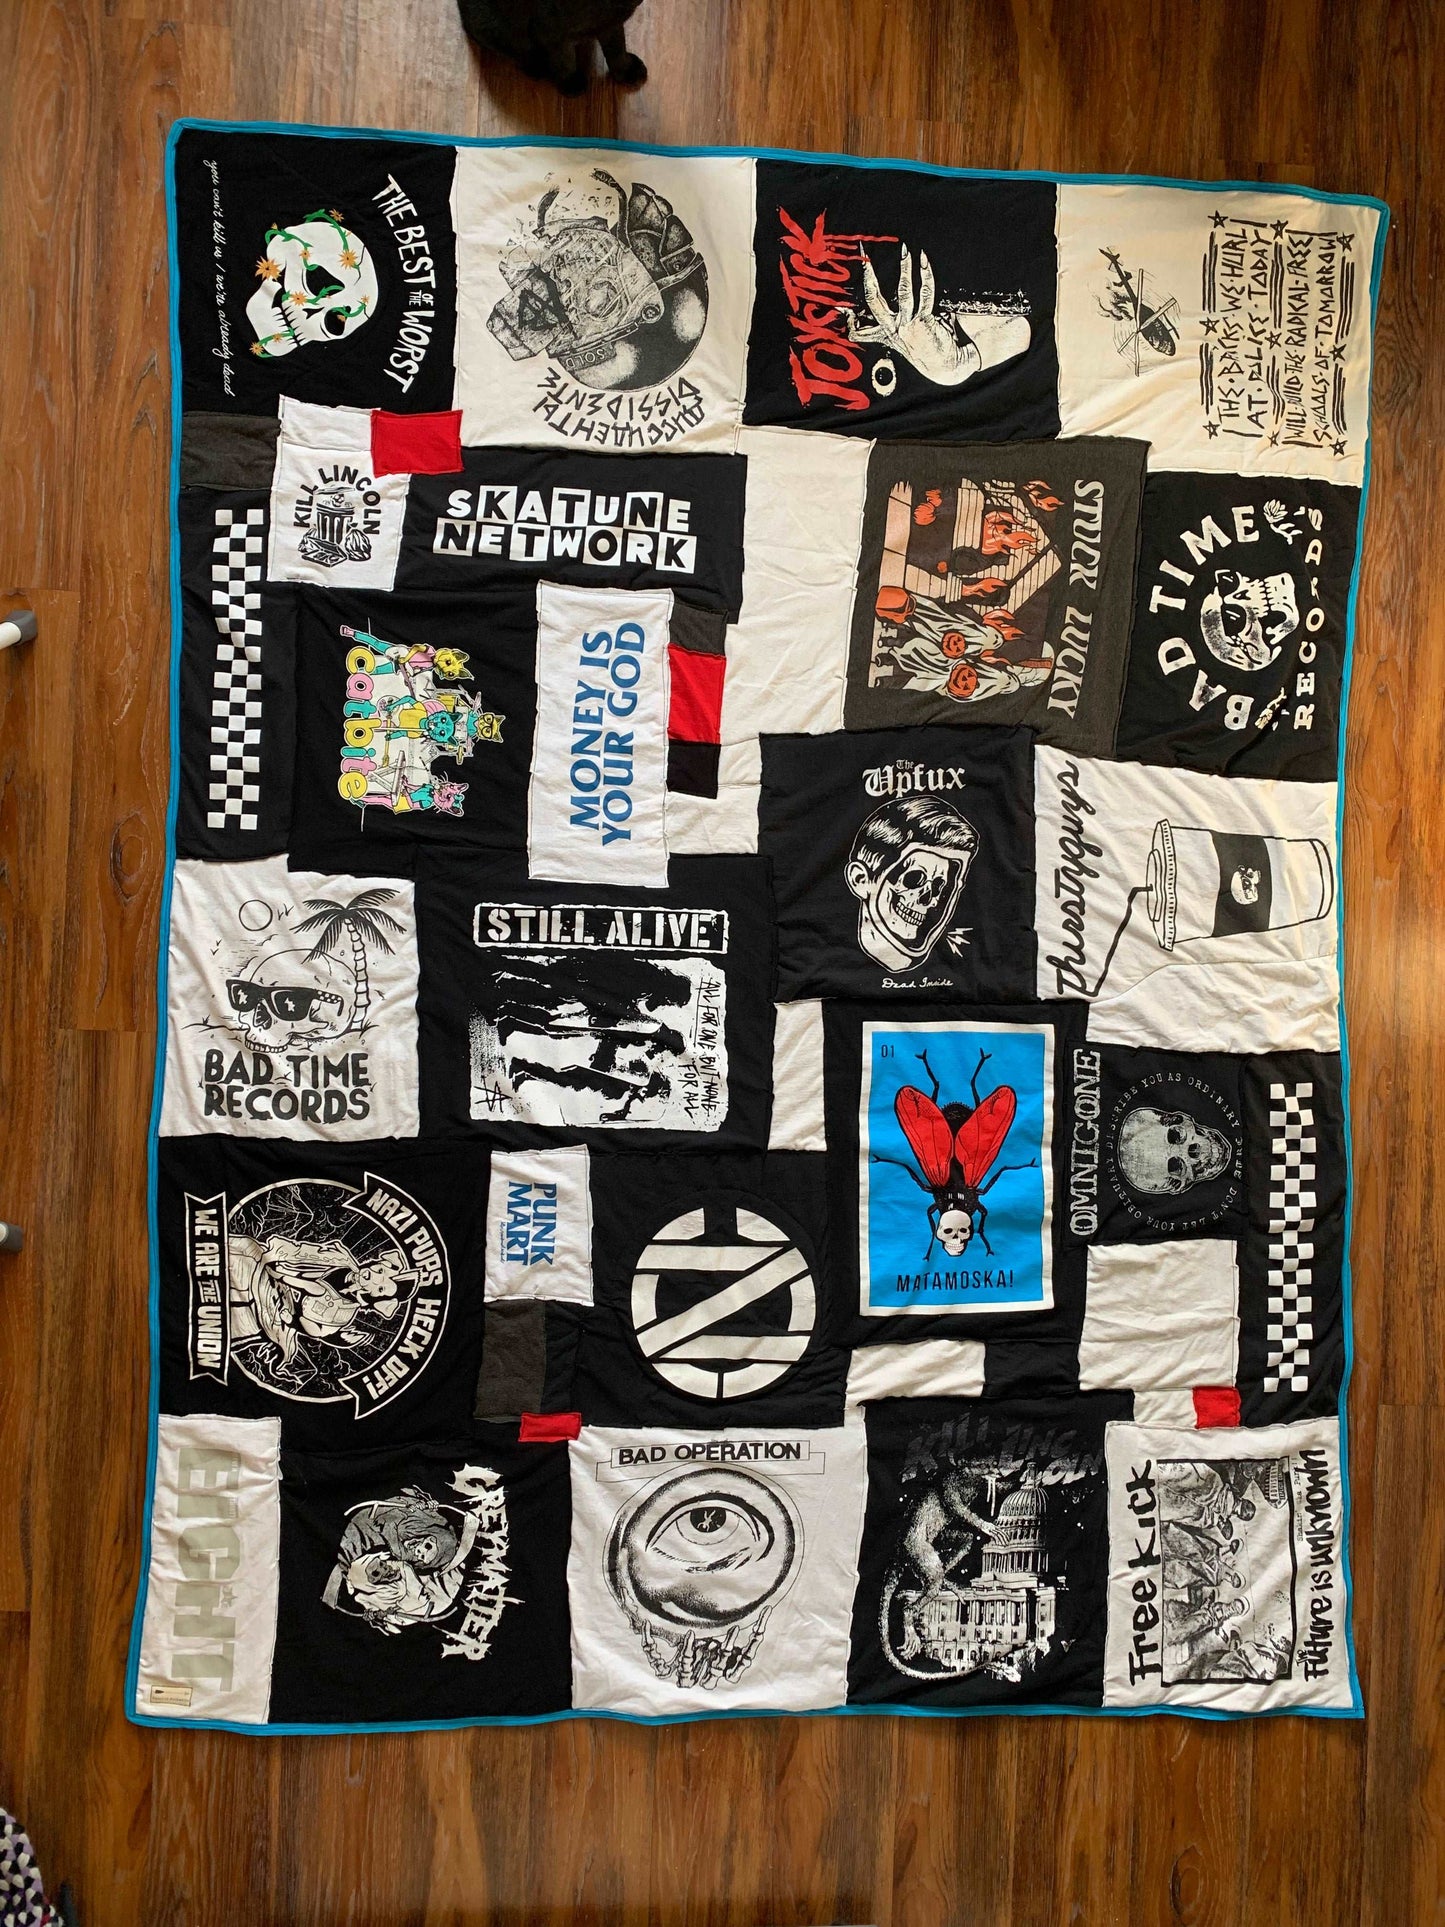 a SKA quilt, with bands from Bad Time Records: freekick, Omnigone, Joystick, Skatune Network, Stuck Lucky, Kill Lincoln, Catbite, Bad Operation, Thirsty Guys, etc 